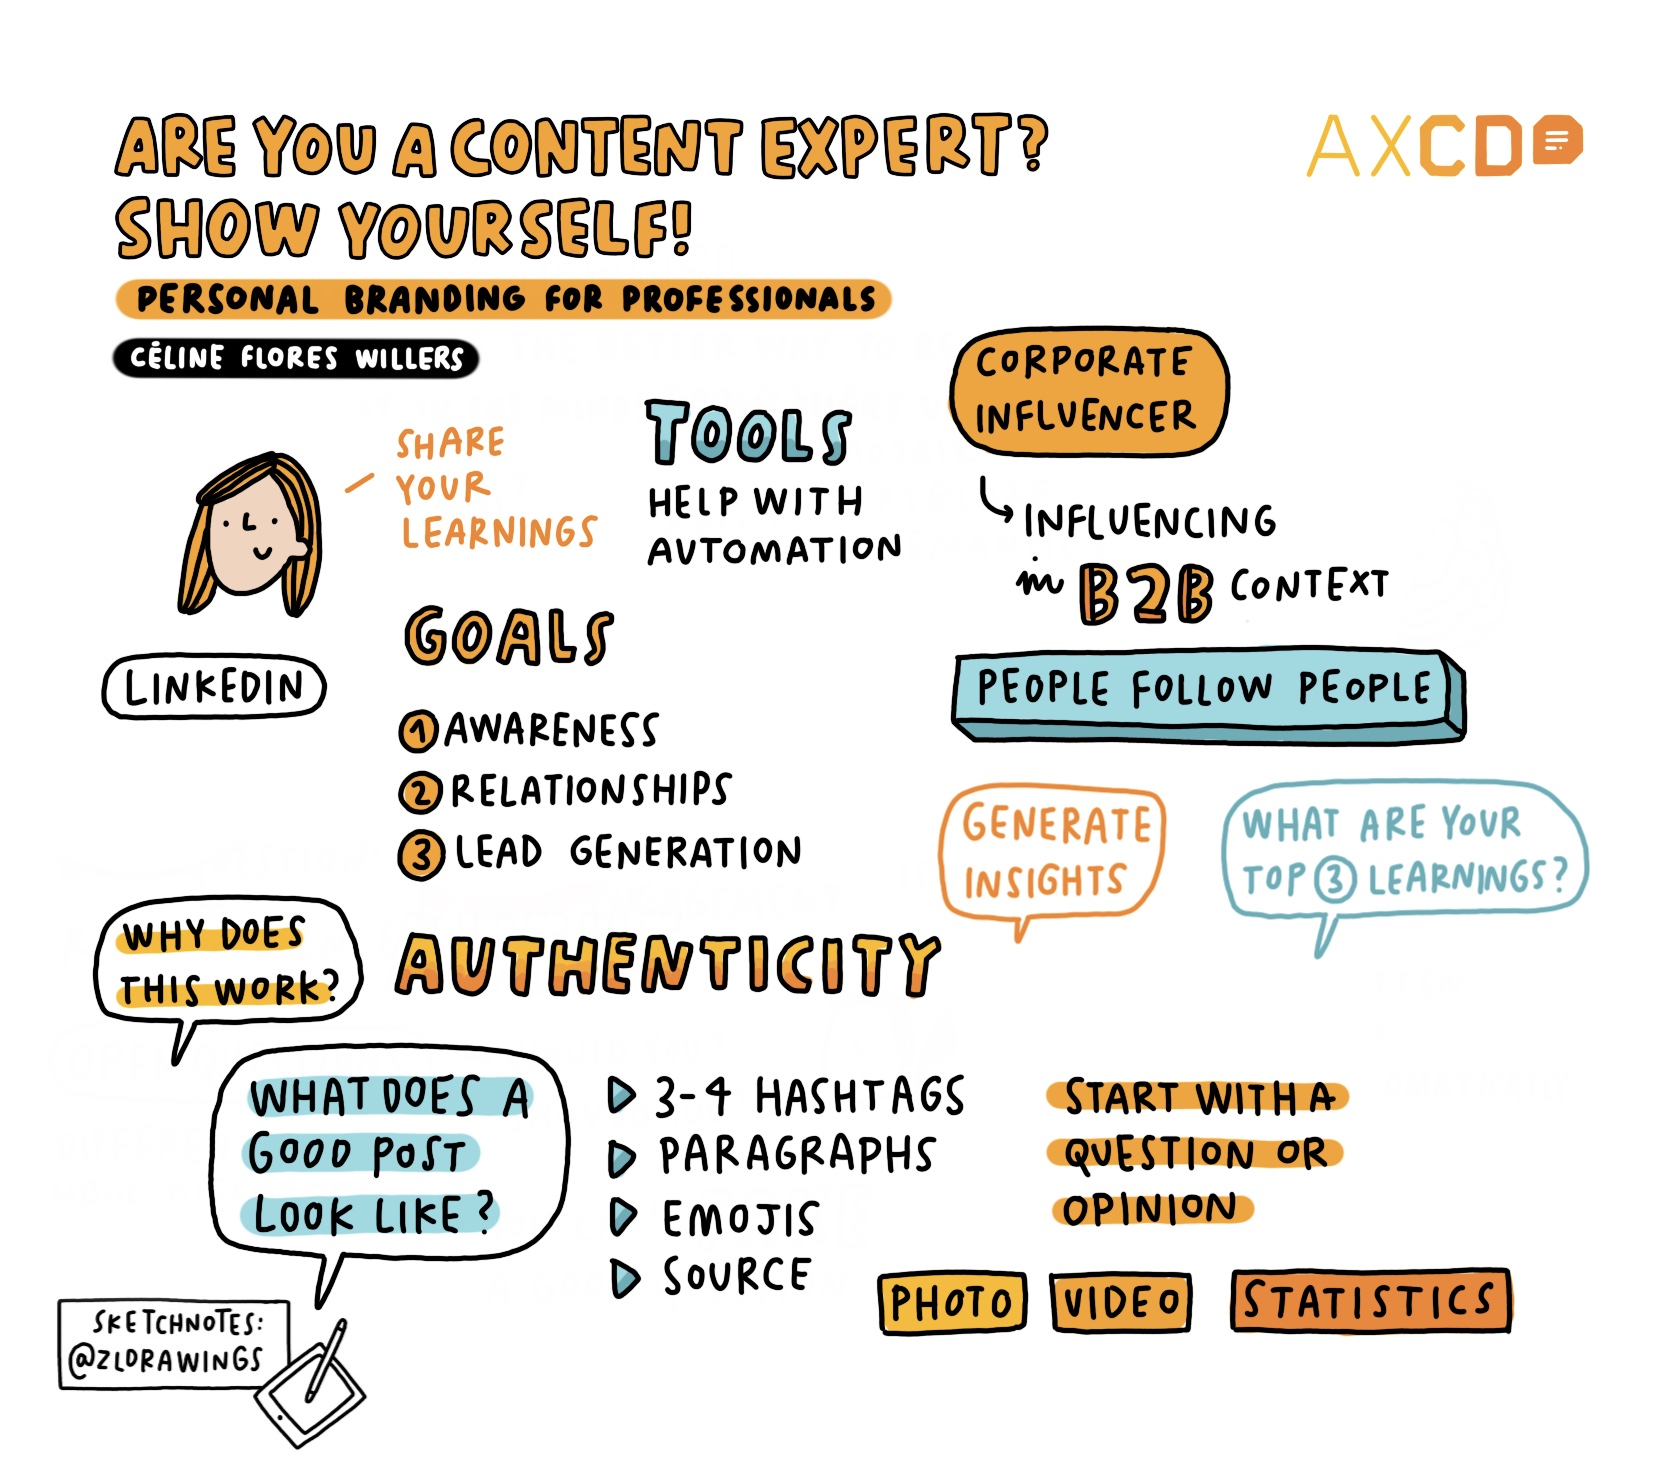 Sketchnote: are you a content expert - AXCD talk about personal branding for experts